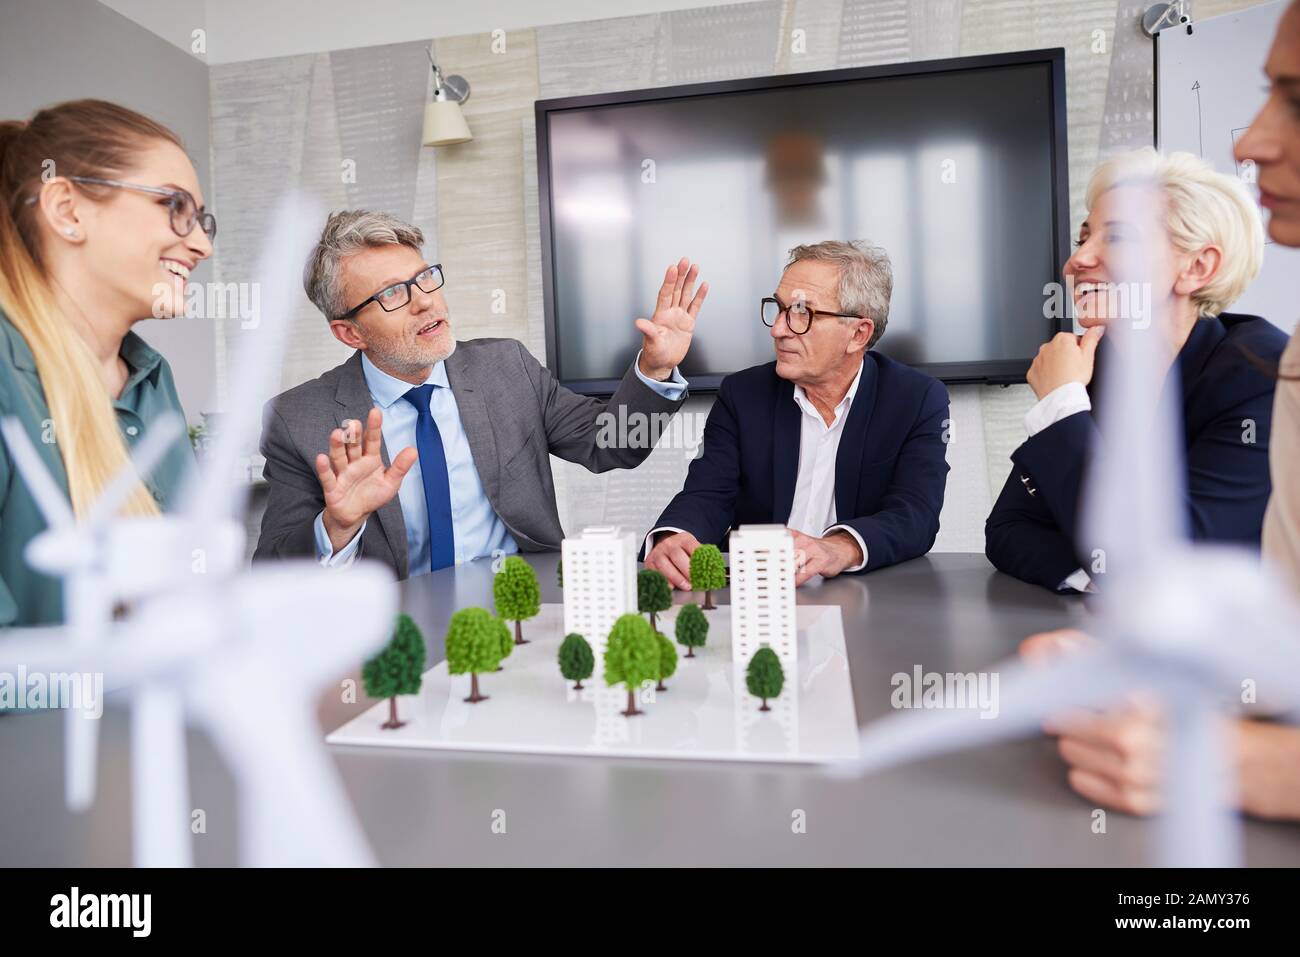 Senior businessman leading during conference Stock Photo